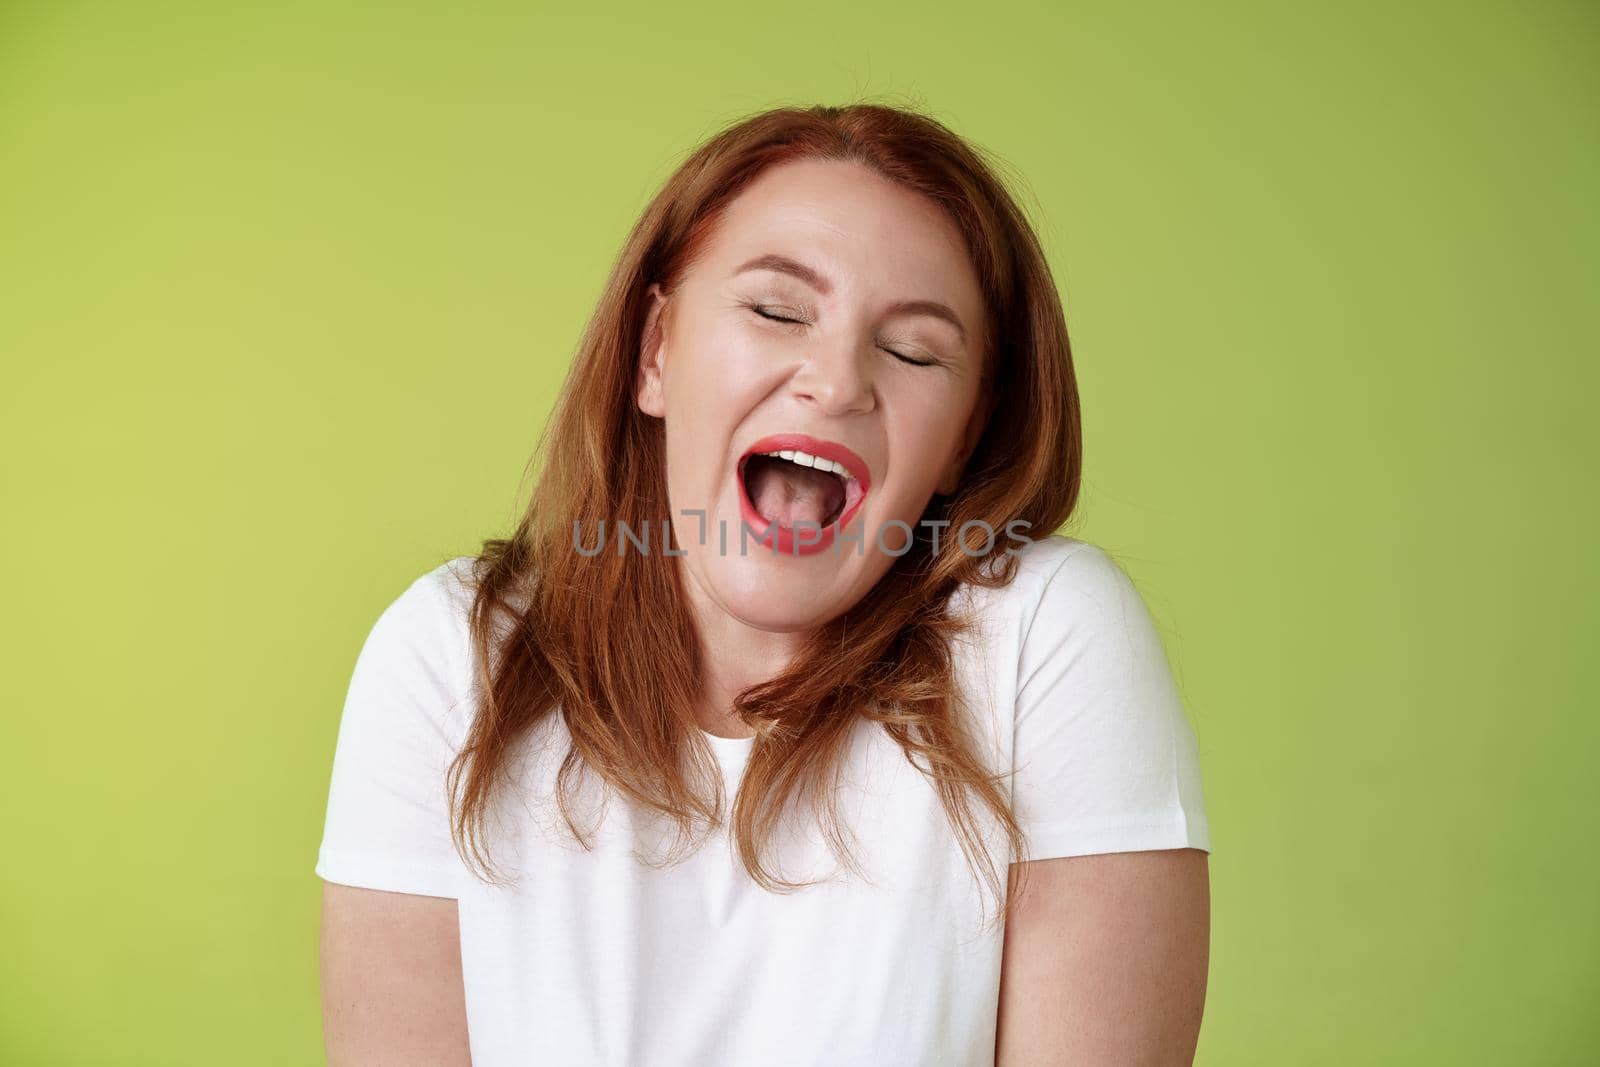 Lazy weekends finally time sleep. Cheerful redhead middle-aged 50s woman yawning satisfied close eyes feel sleepy wake up early morning wanna take nap stand green background watching boring film.